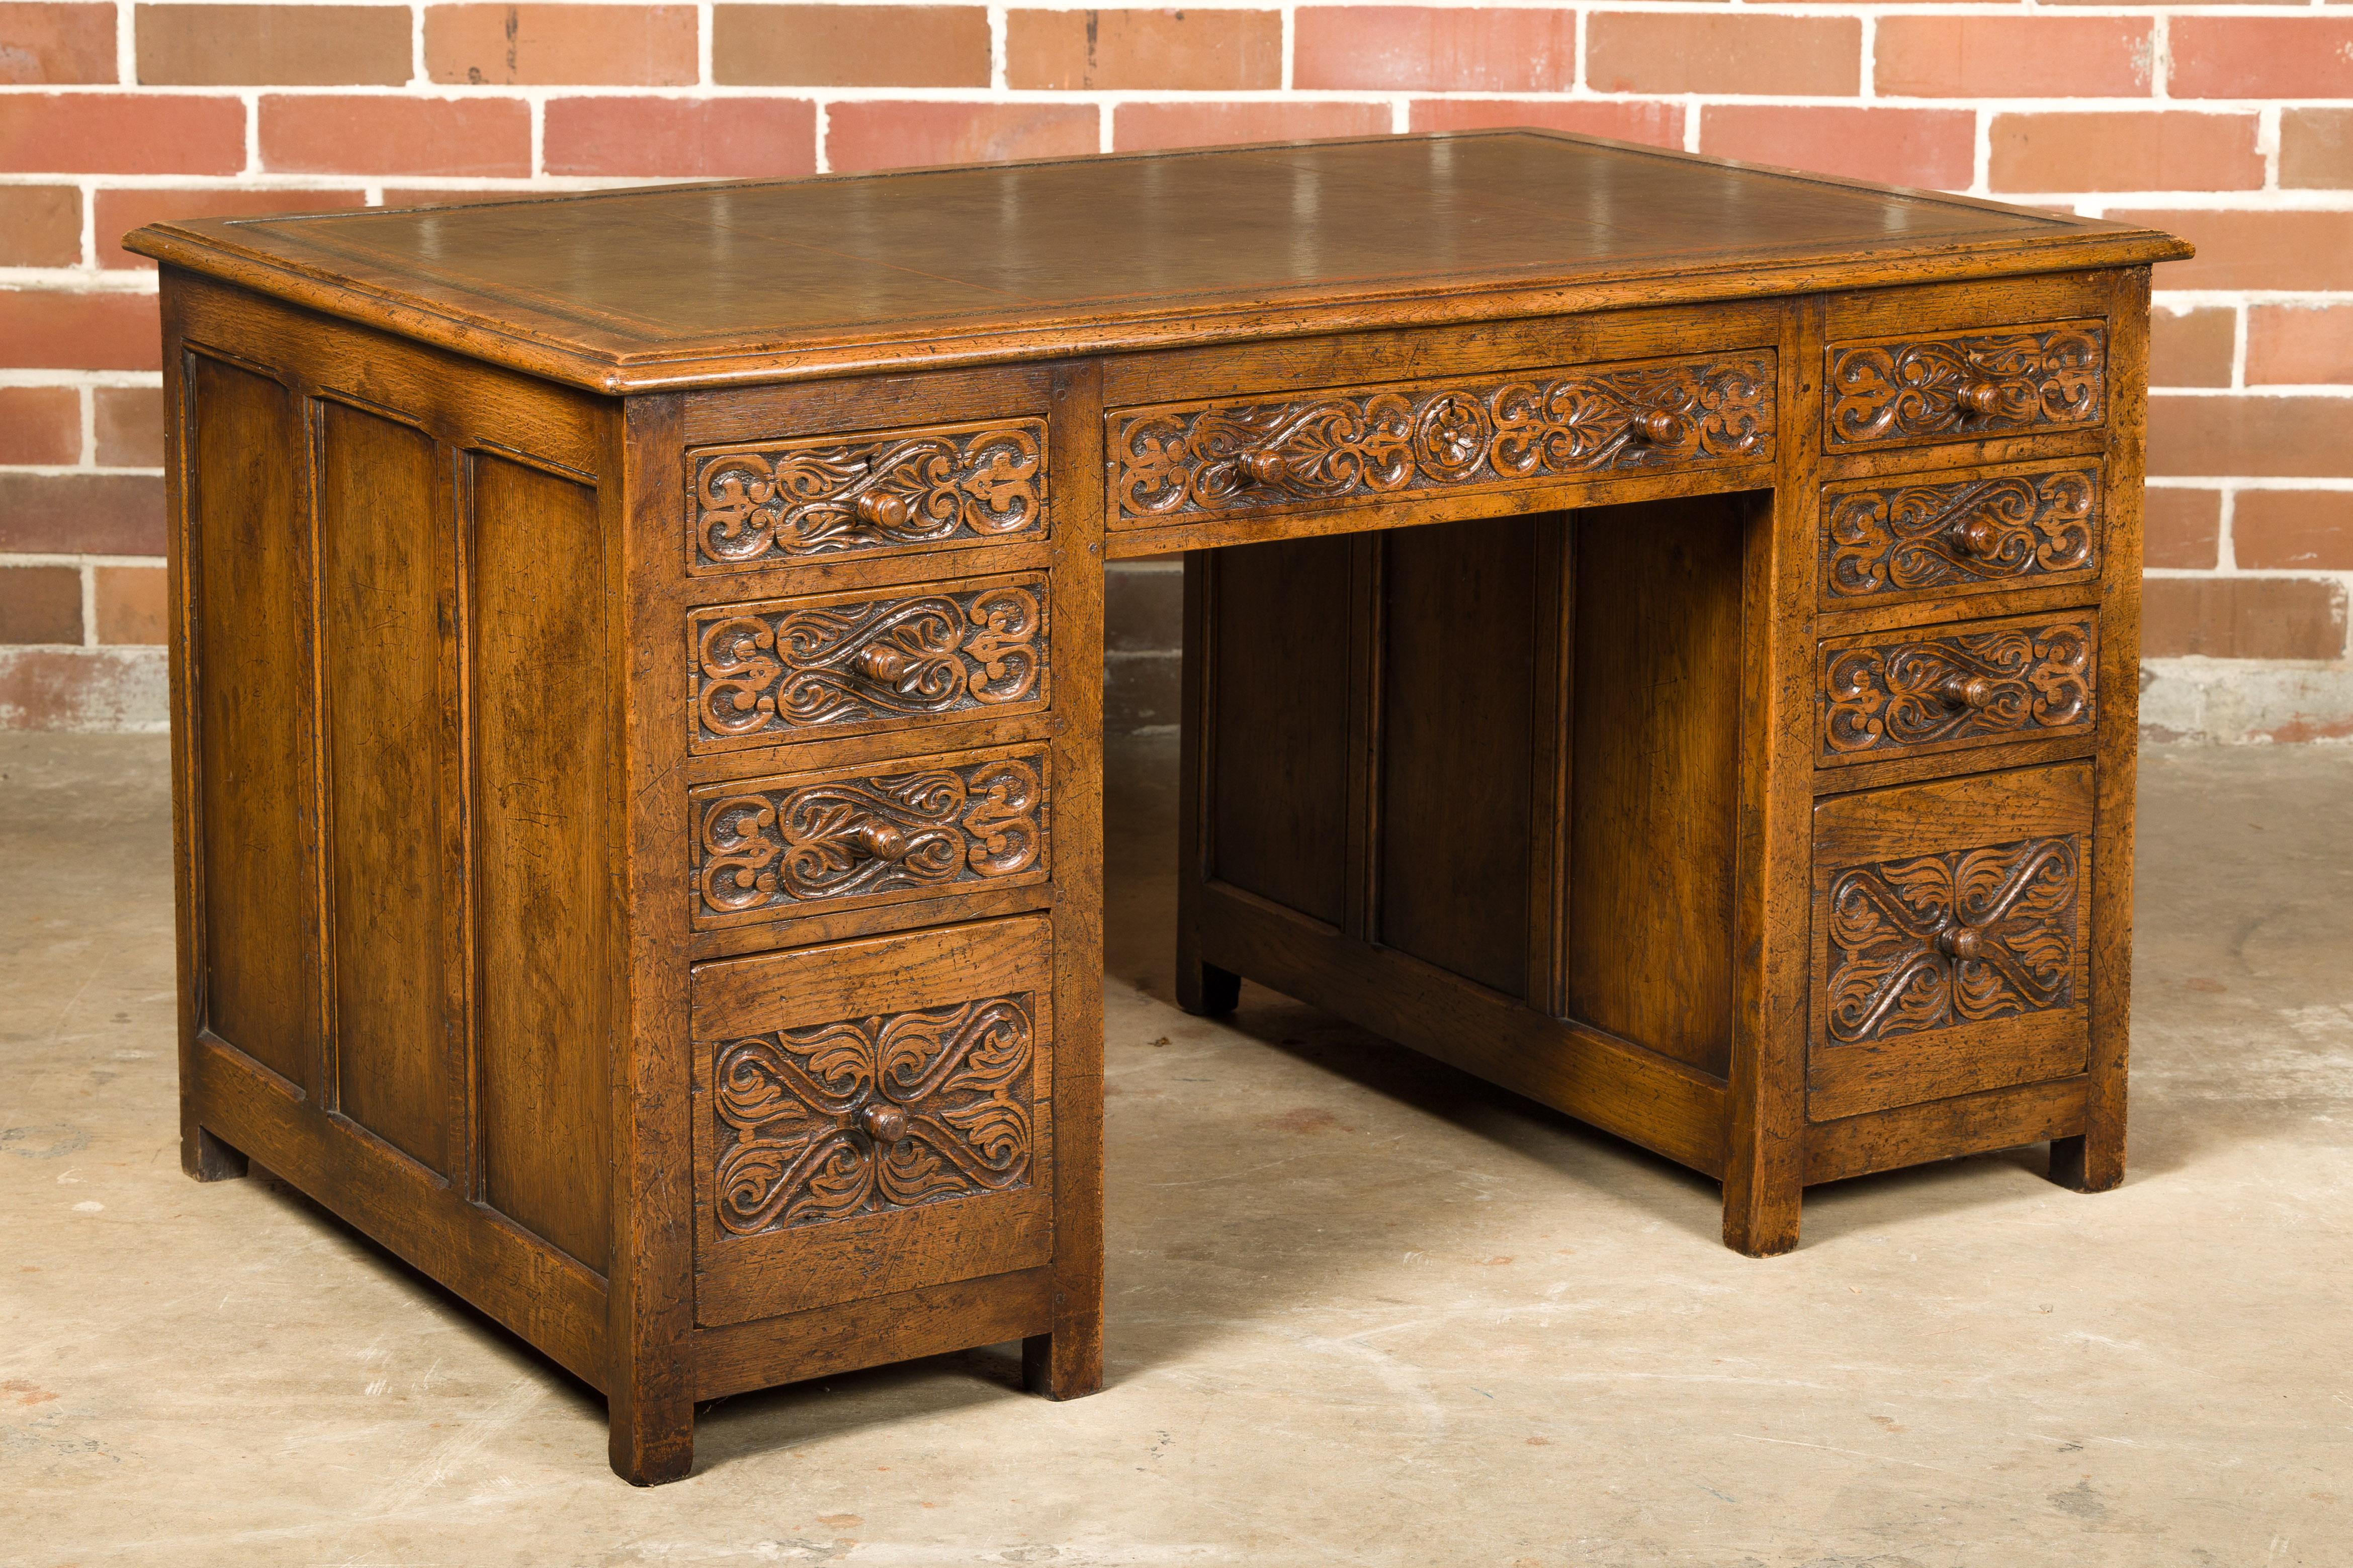 English 19th Century Oak Kneehole Desk with Nine Drawers and Carved Foliage For Sale 10